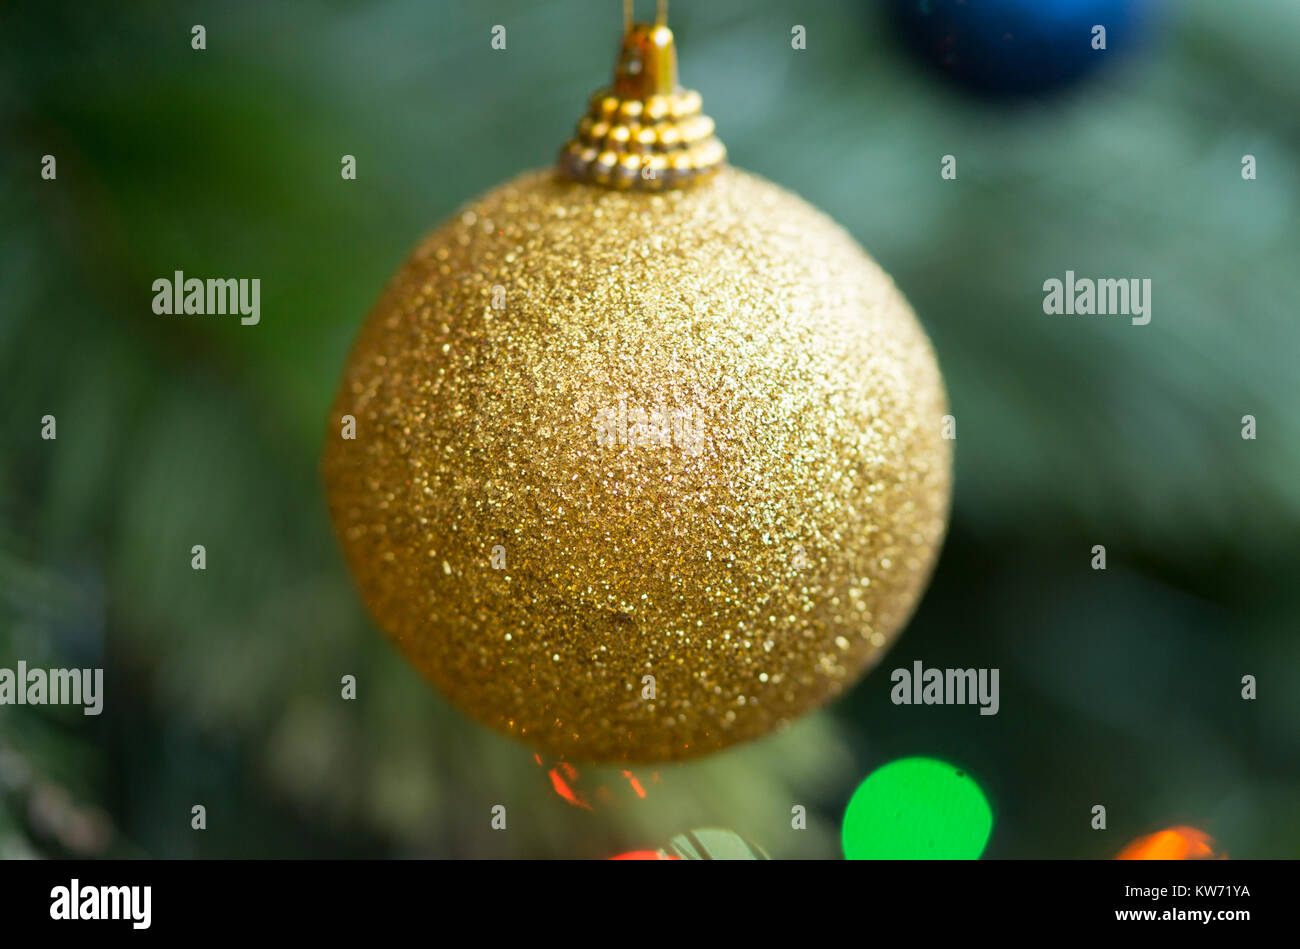 A closeup of a single yellow bauble decoration suspended from a Christmas tree Stock Photo